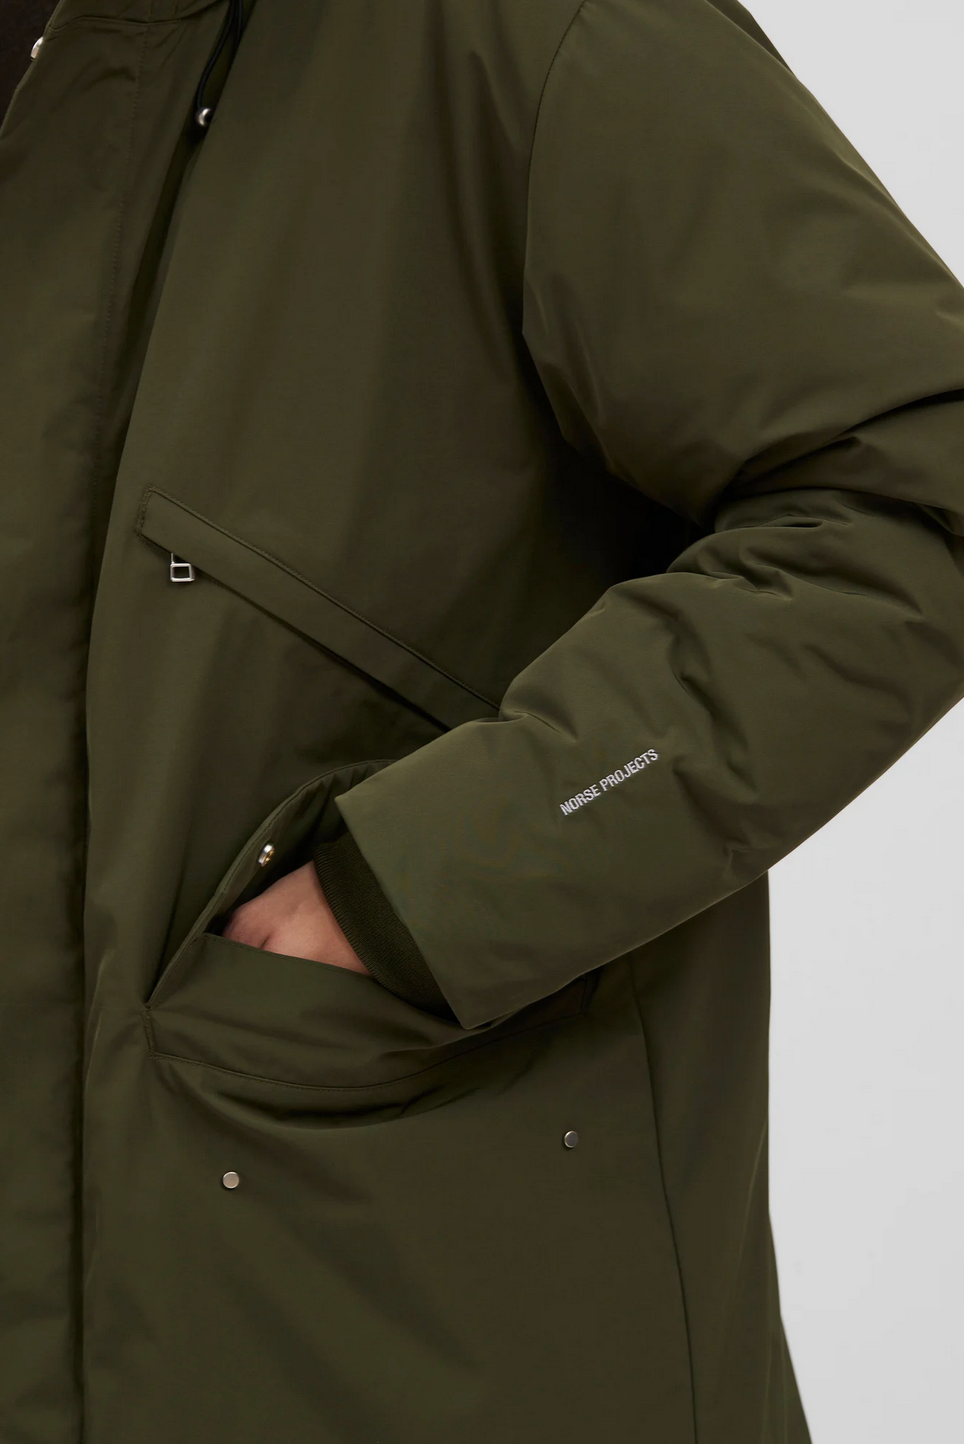 Stavanger Military Nylon Insulated Parka - Army Green